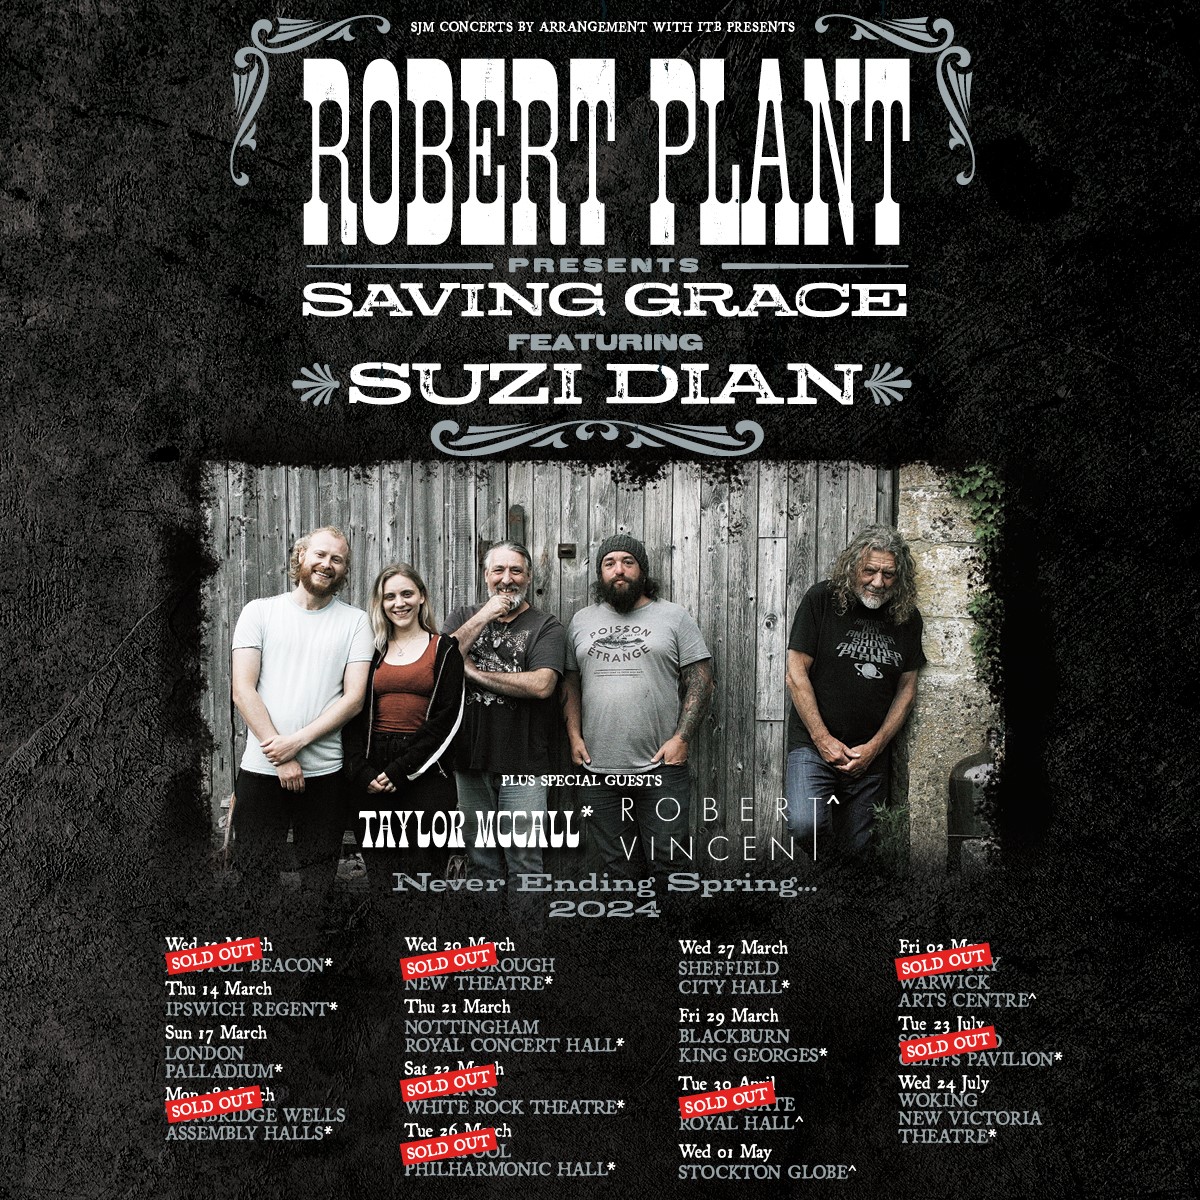 Rock legend @RobertPlant with band Saving Grace ft Suzi Dian and special guest Taylor McCall will play #Nottingham Royal Concert Hall tomorrow Thu, March 21, 7.30pm Limited tickets at tinyurl.com/ybj3djfz and gigsandtours.com/event/robert-p… @RoyalNottingham @SJMConcerts #ad